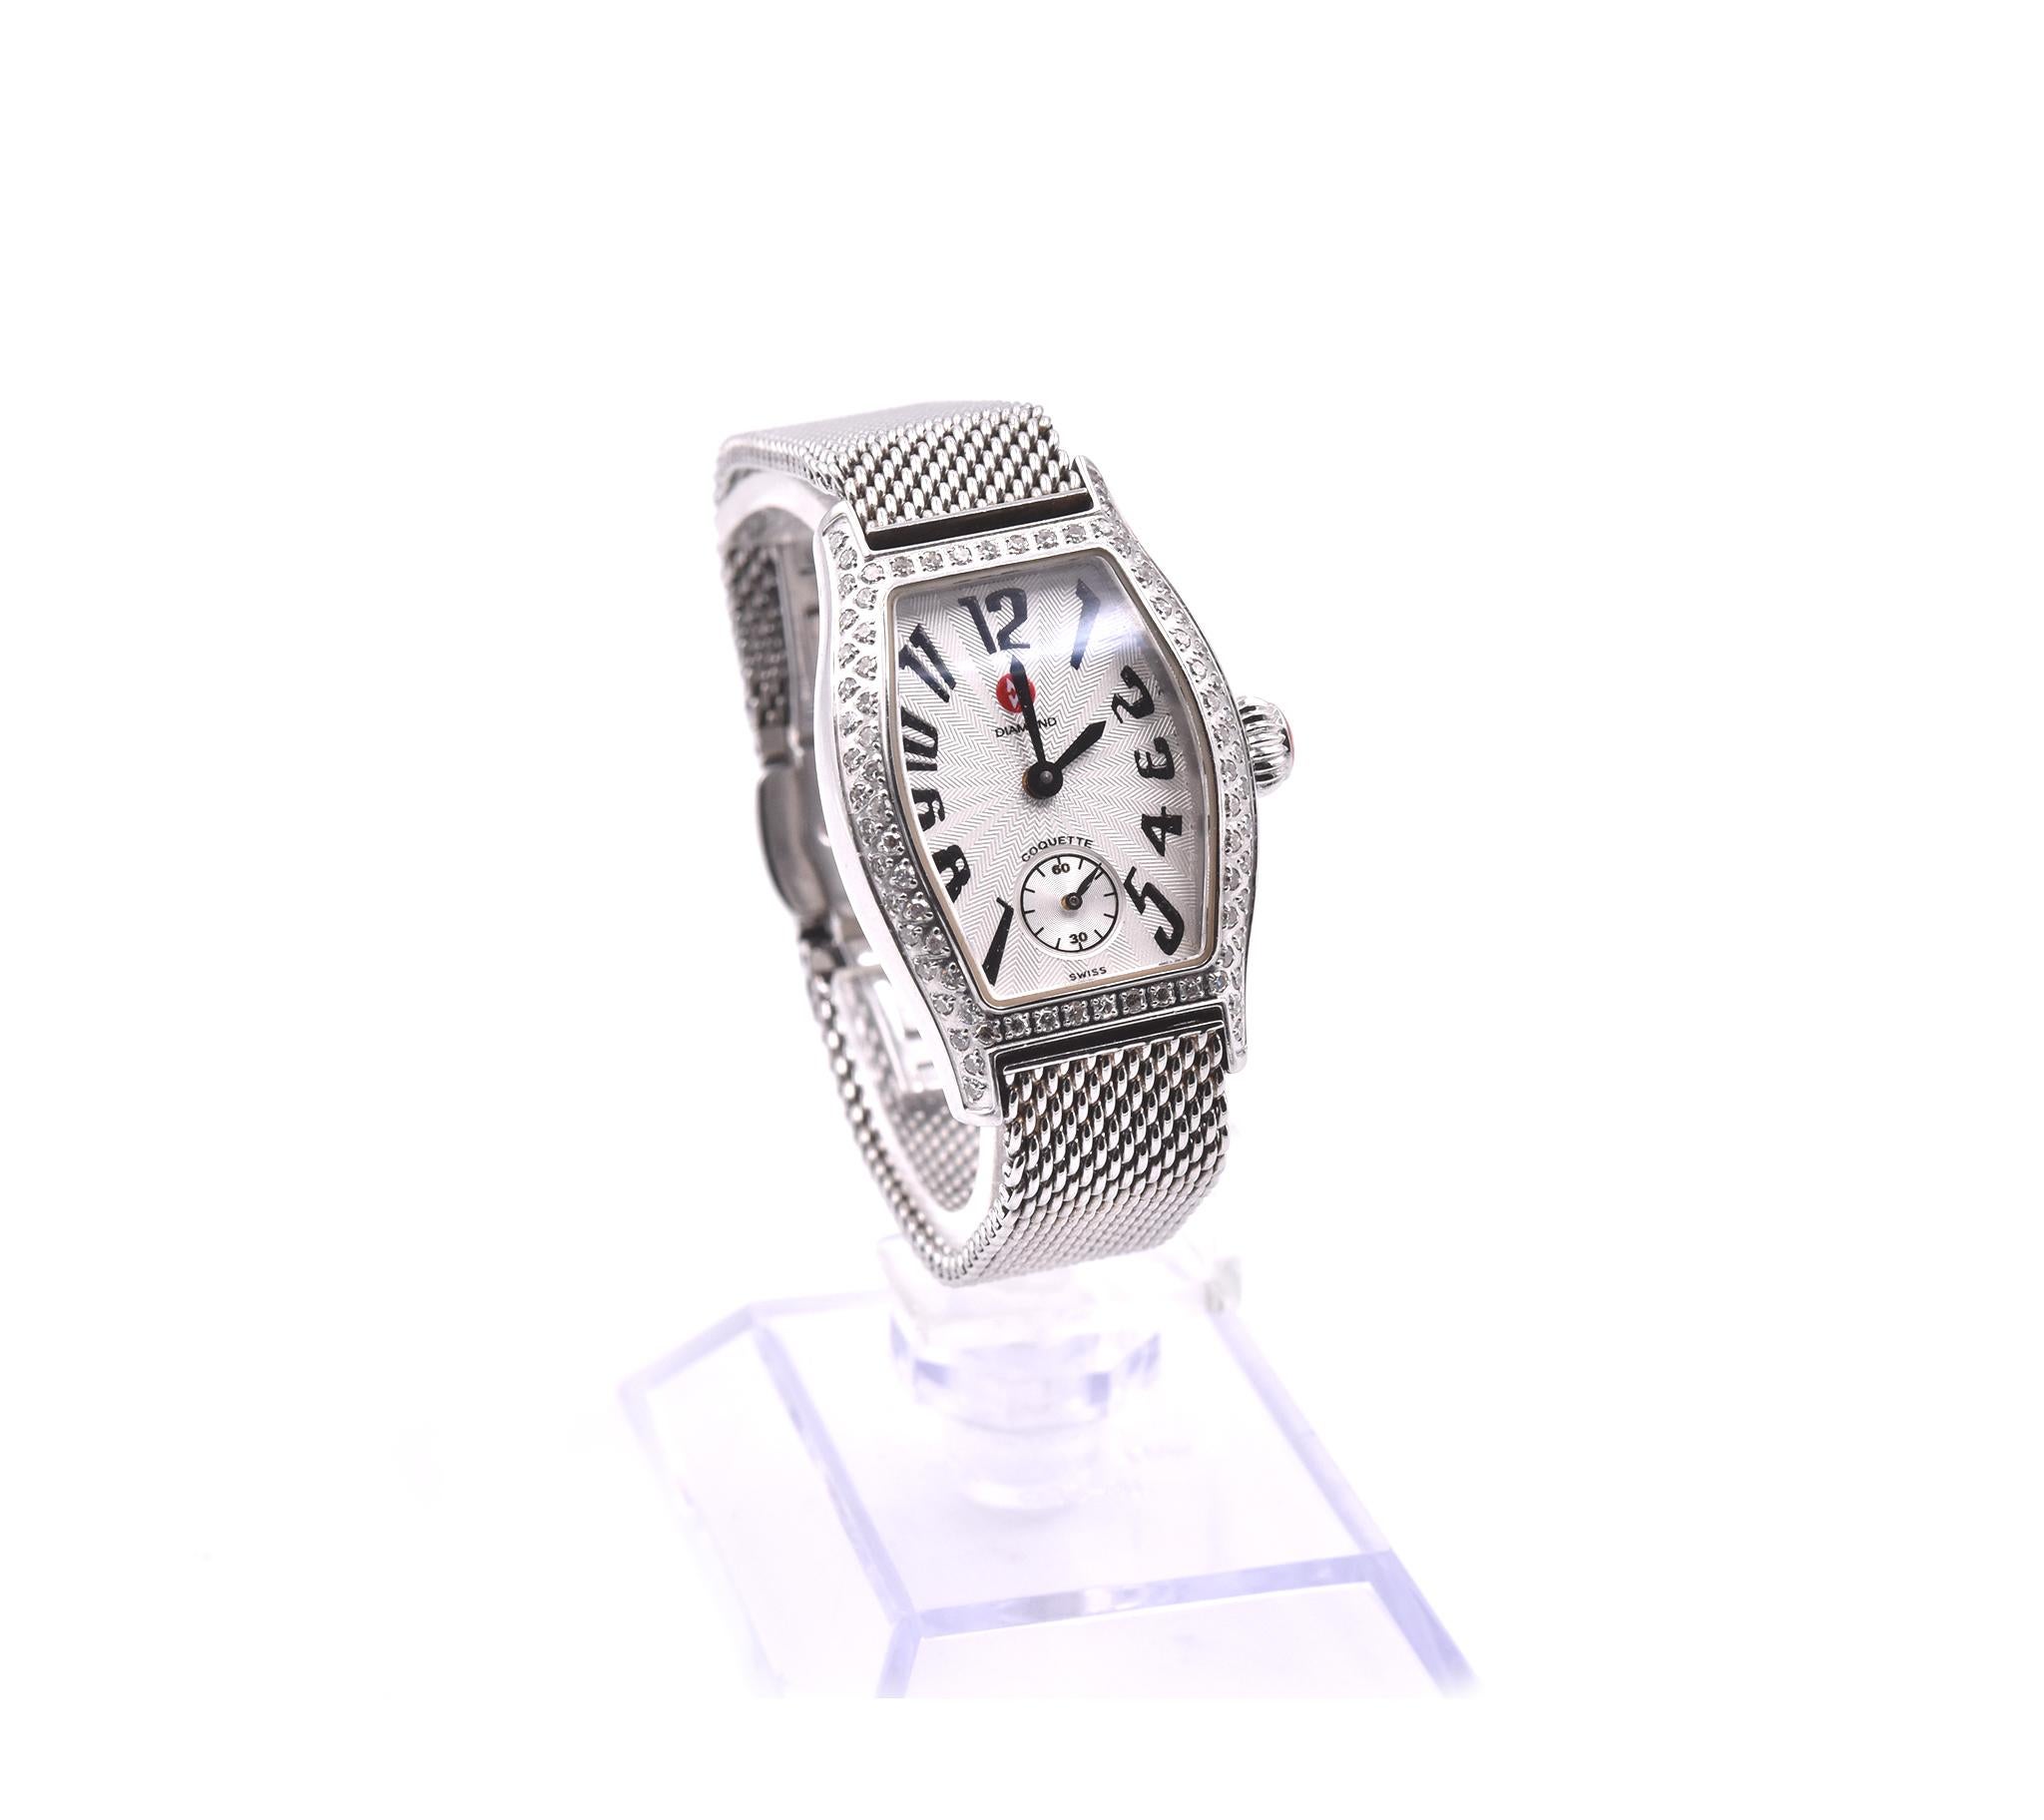 Movement: quarts
Function: hours, minutes, 
Case: 25mm x 22mm stainless steel case, sapphire protective crystal, diamond bezel
Dial: silver guilloche dial with Arabic numerals, sub seconds
Band: stainless steel band 
Serial #: M0396XXX
Reference #: